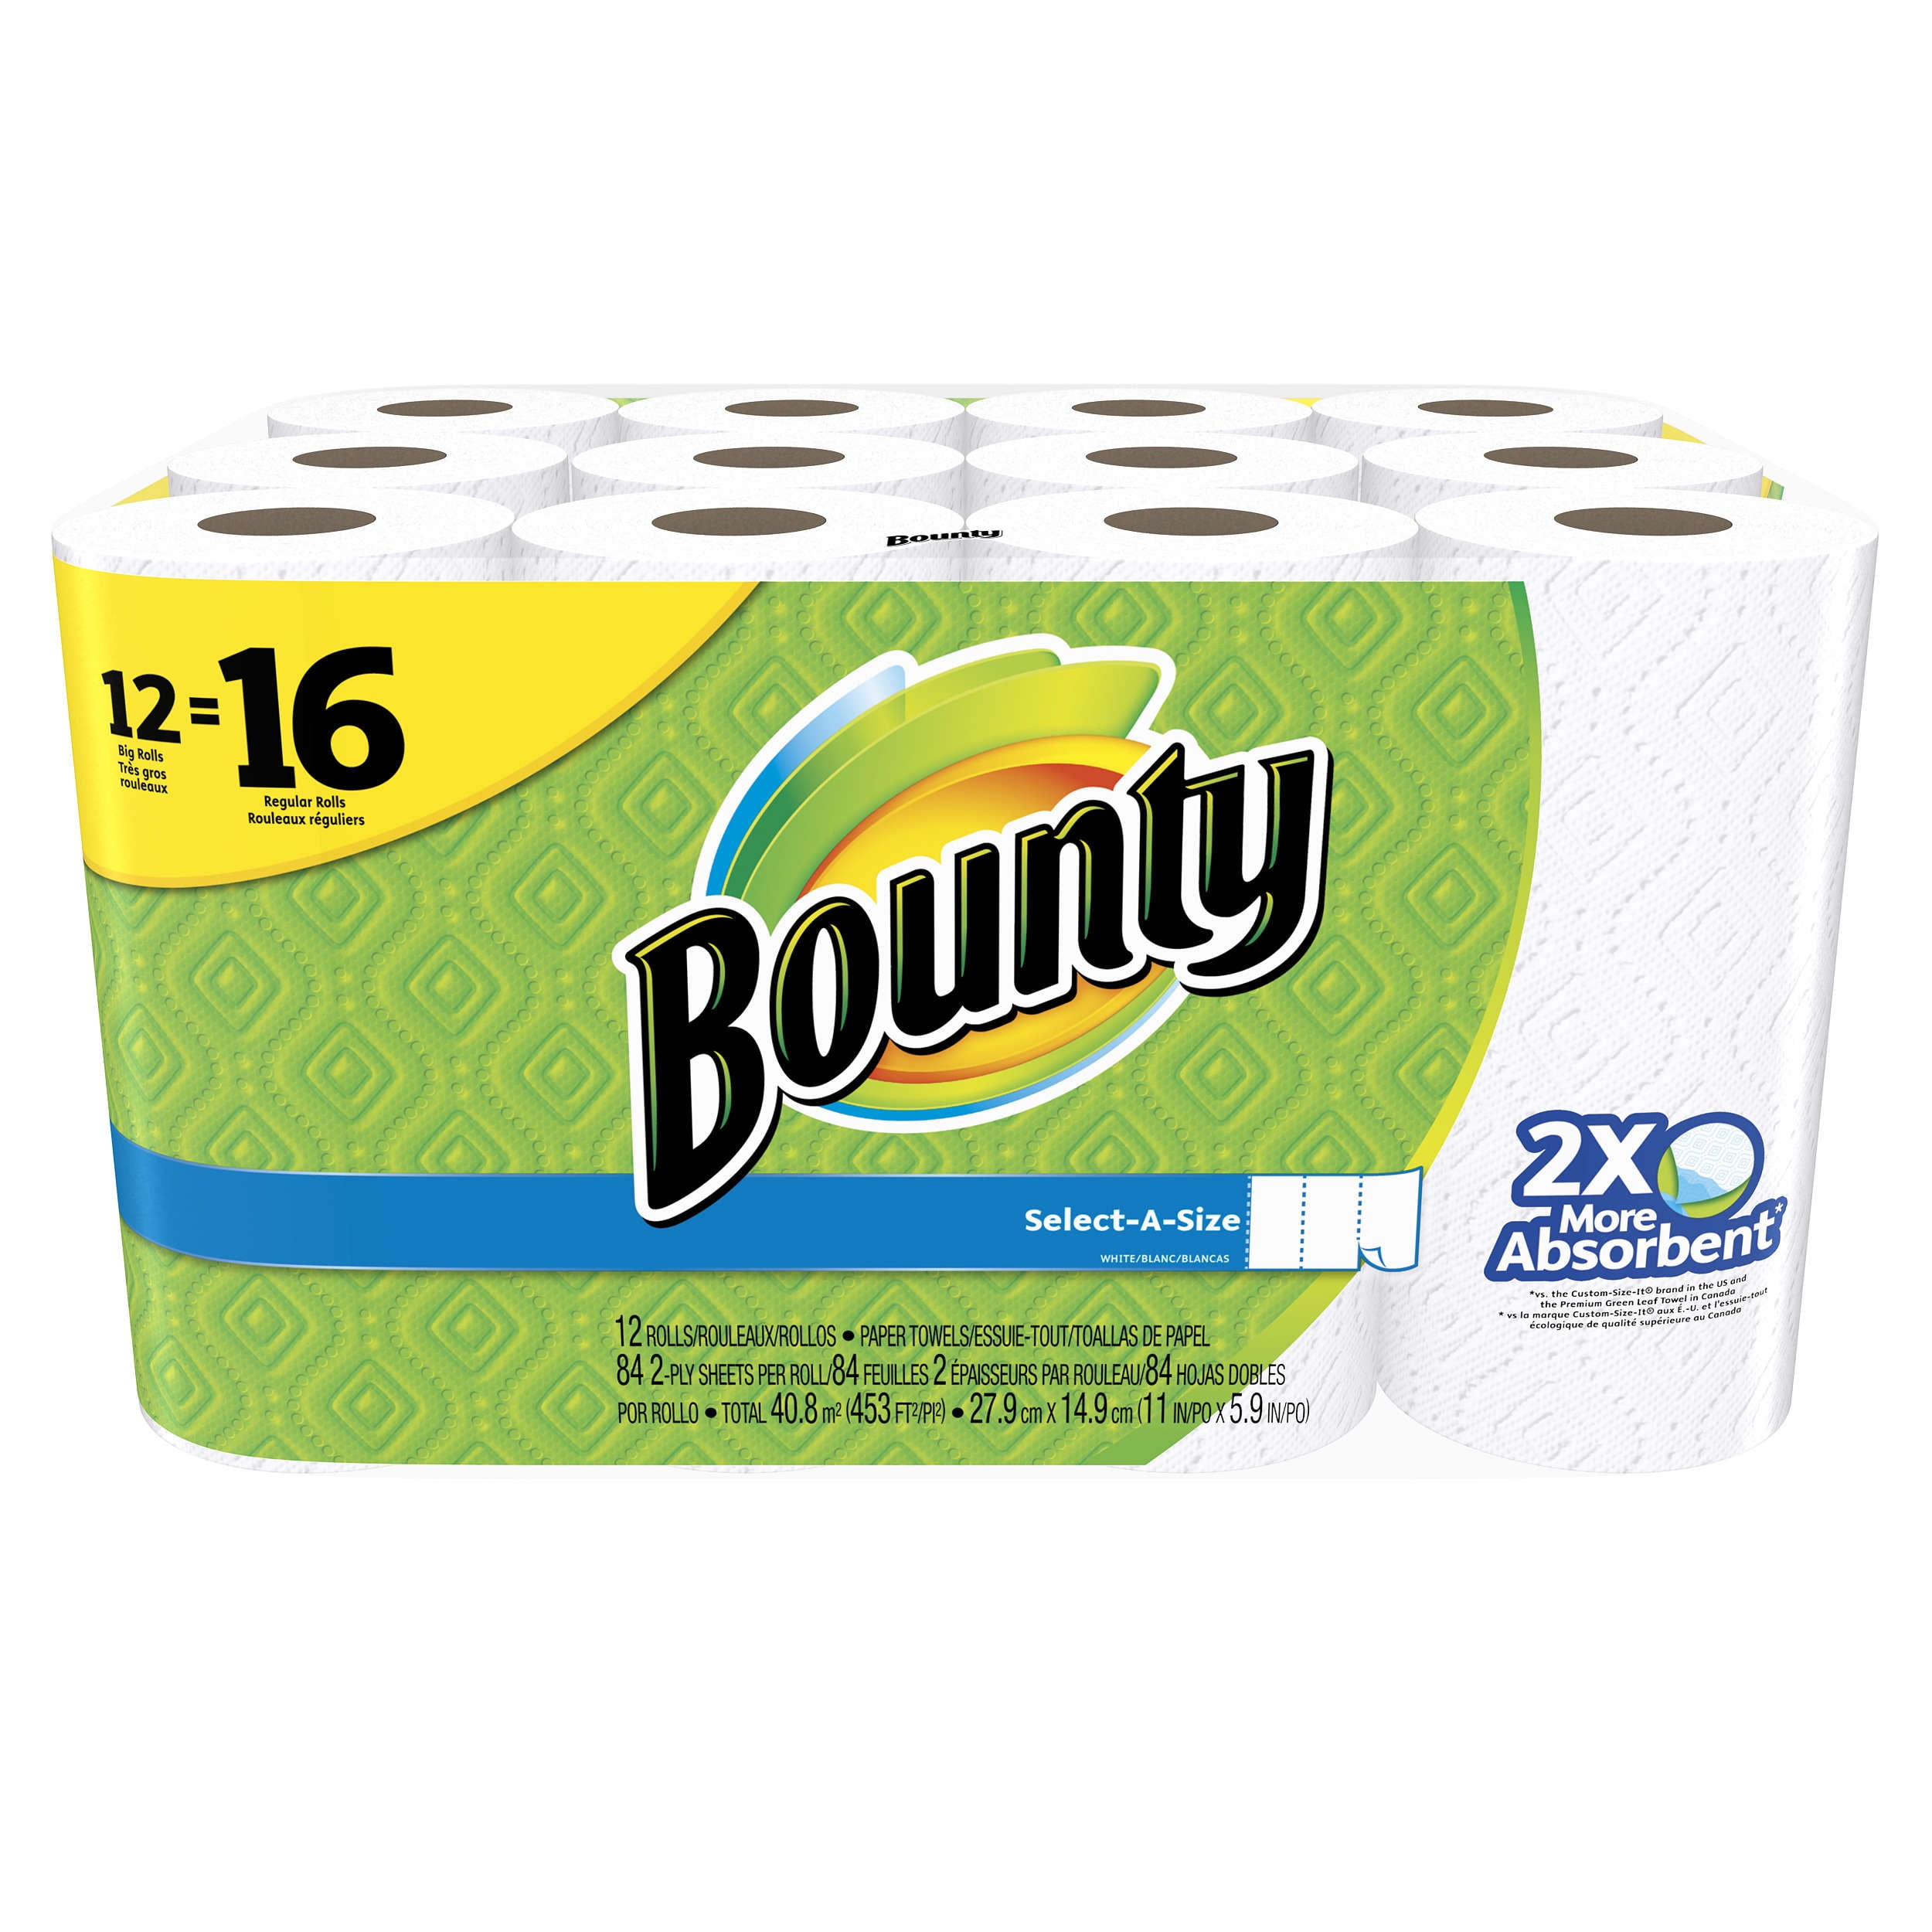 Bounty Quick-Size Paper Towels White Family Rolls 16 Count Equal to 40 Rolls 